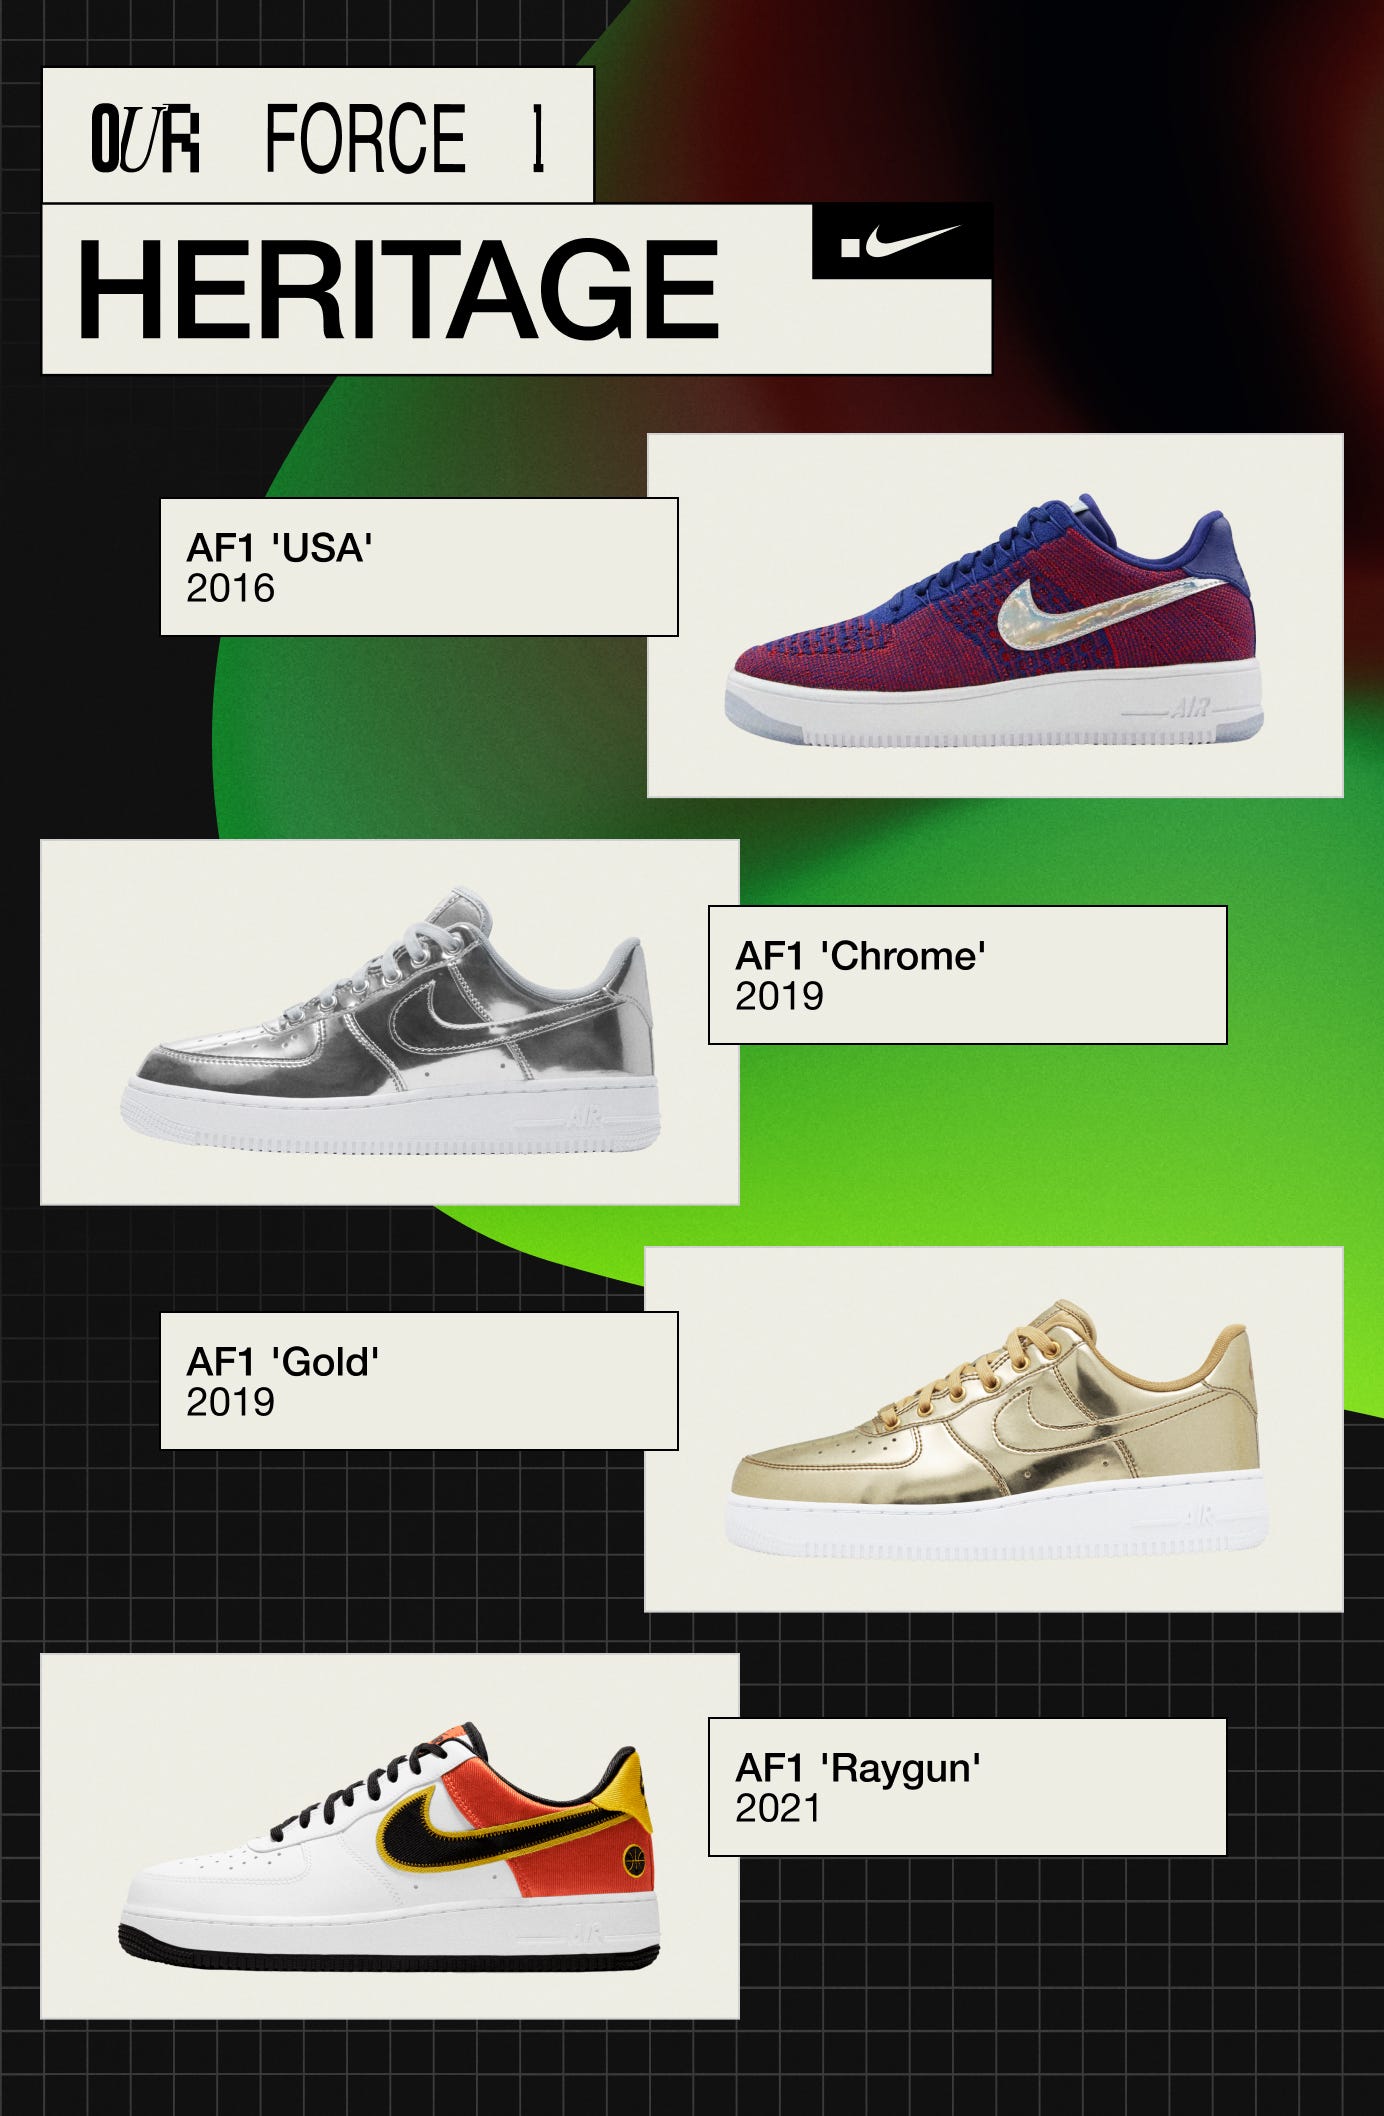 Our Force 1 — Heritage Bracket. The 16 pairs that comprise the Heritage… |  by dotSWOOSH | Medium